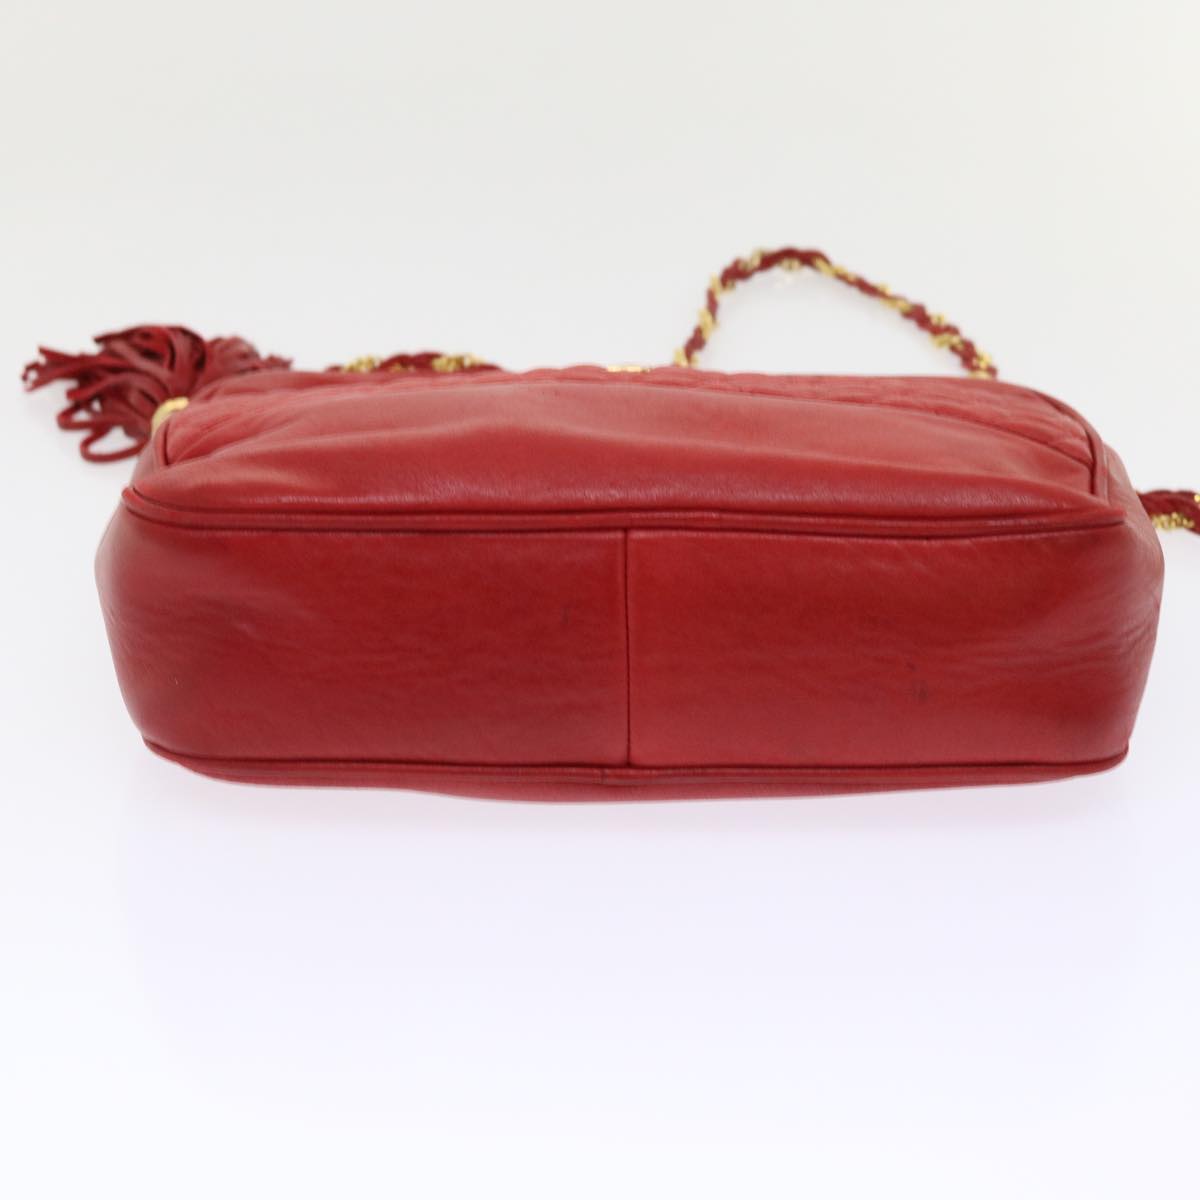 Bally Chain Shoulder Bag Leather Red Auth Yb317